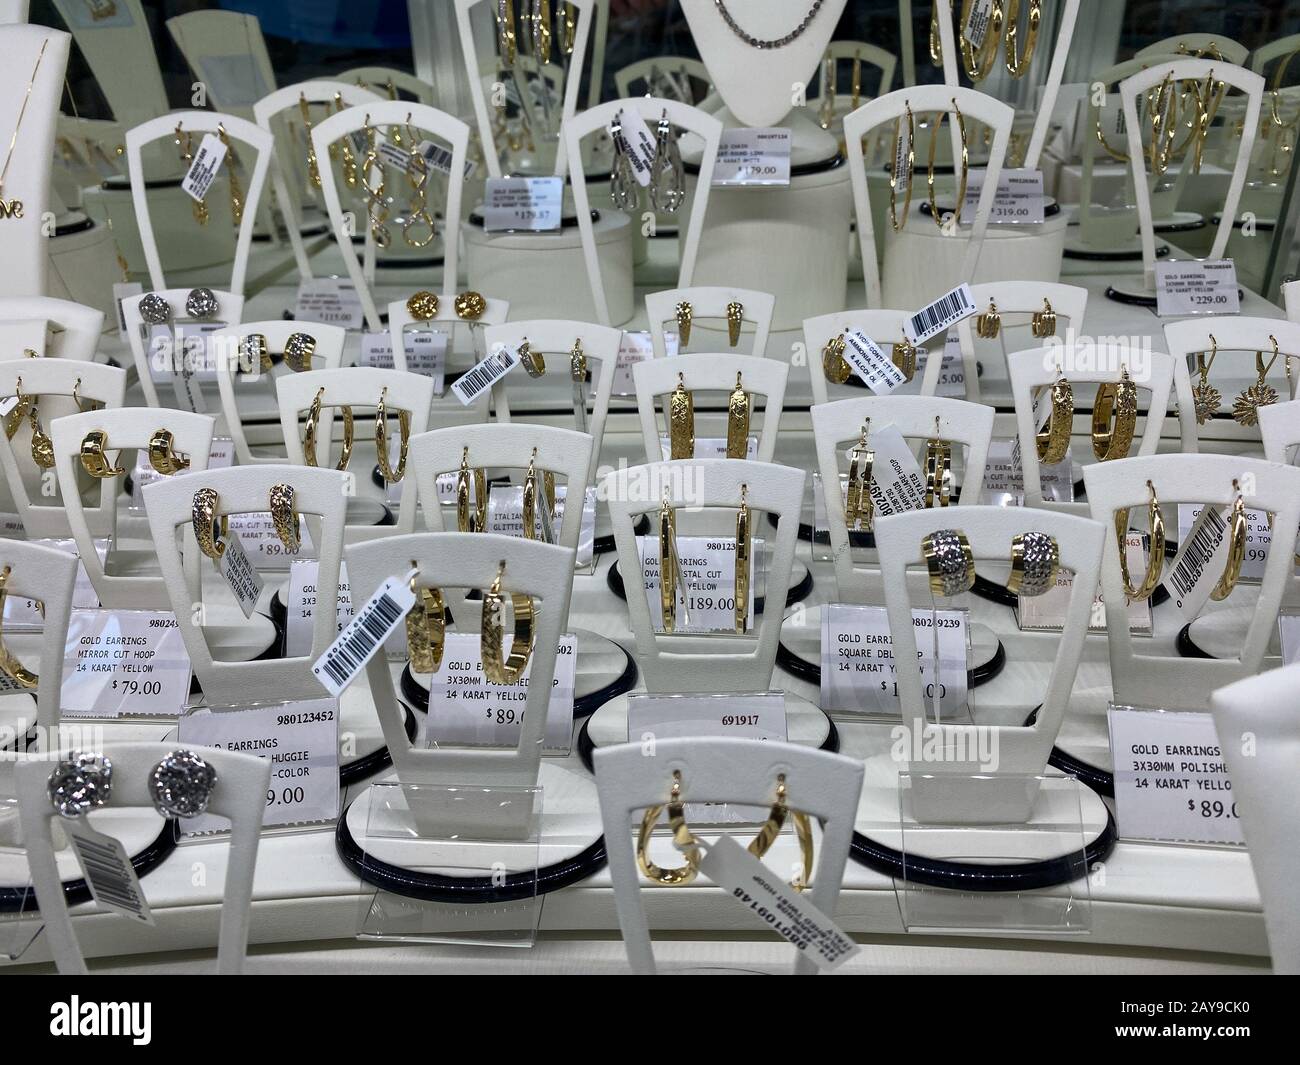 Orlando, FL/USA-2/11/20: A jewelry display case of diamond earrings waiting  for customers to purchase at a Sams Club retail store Stock Photo - Alamy